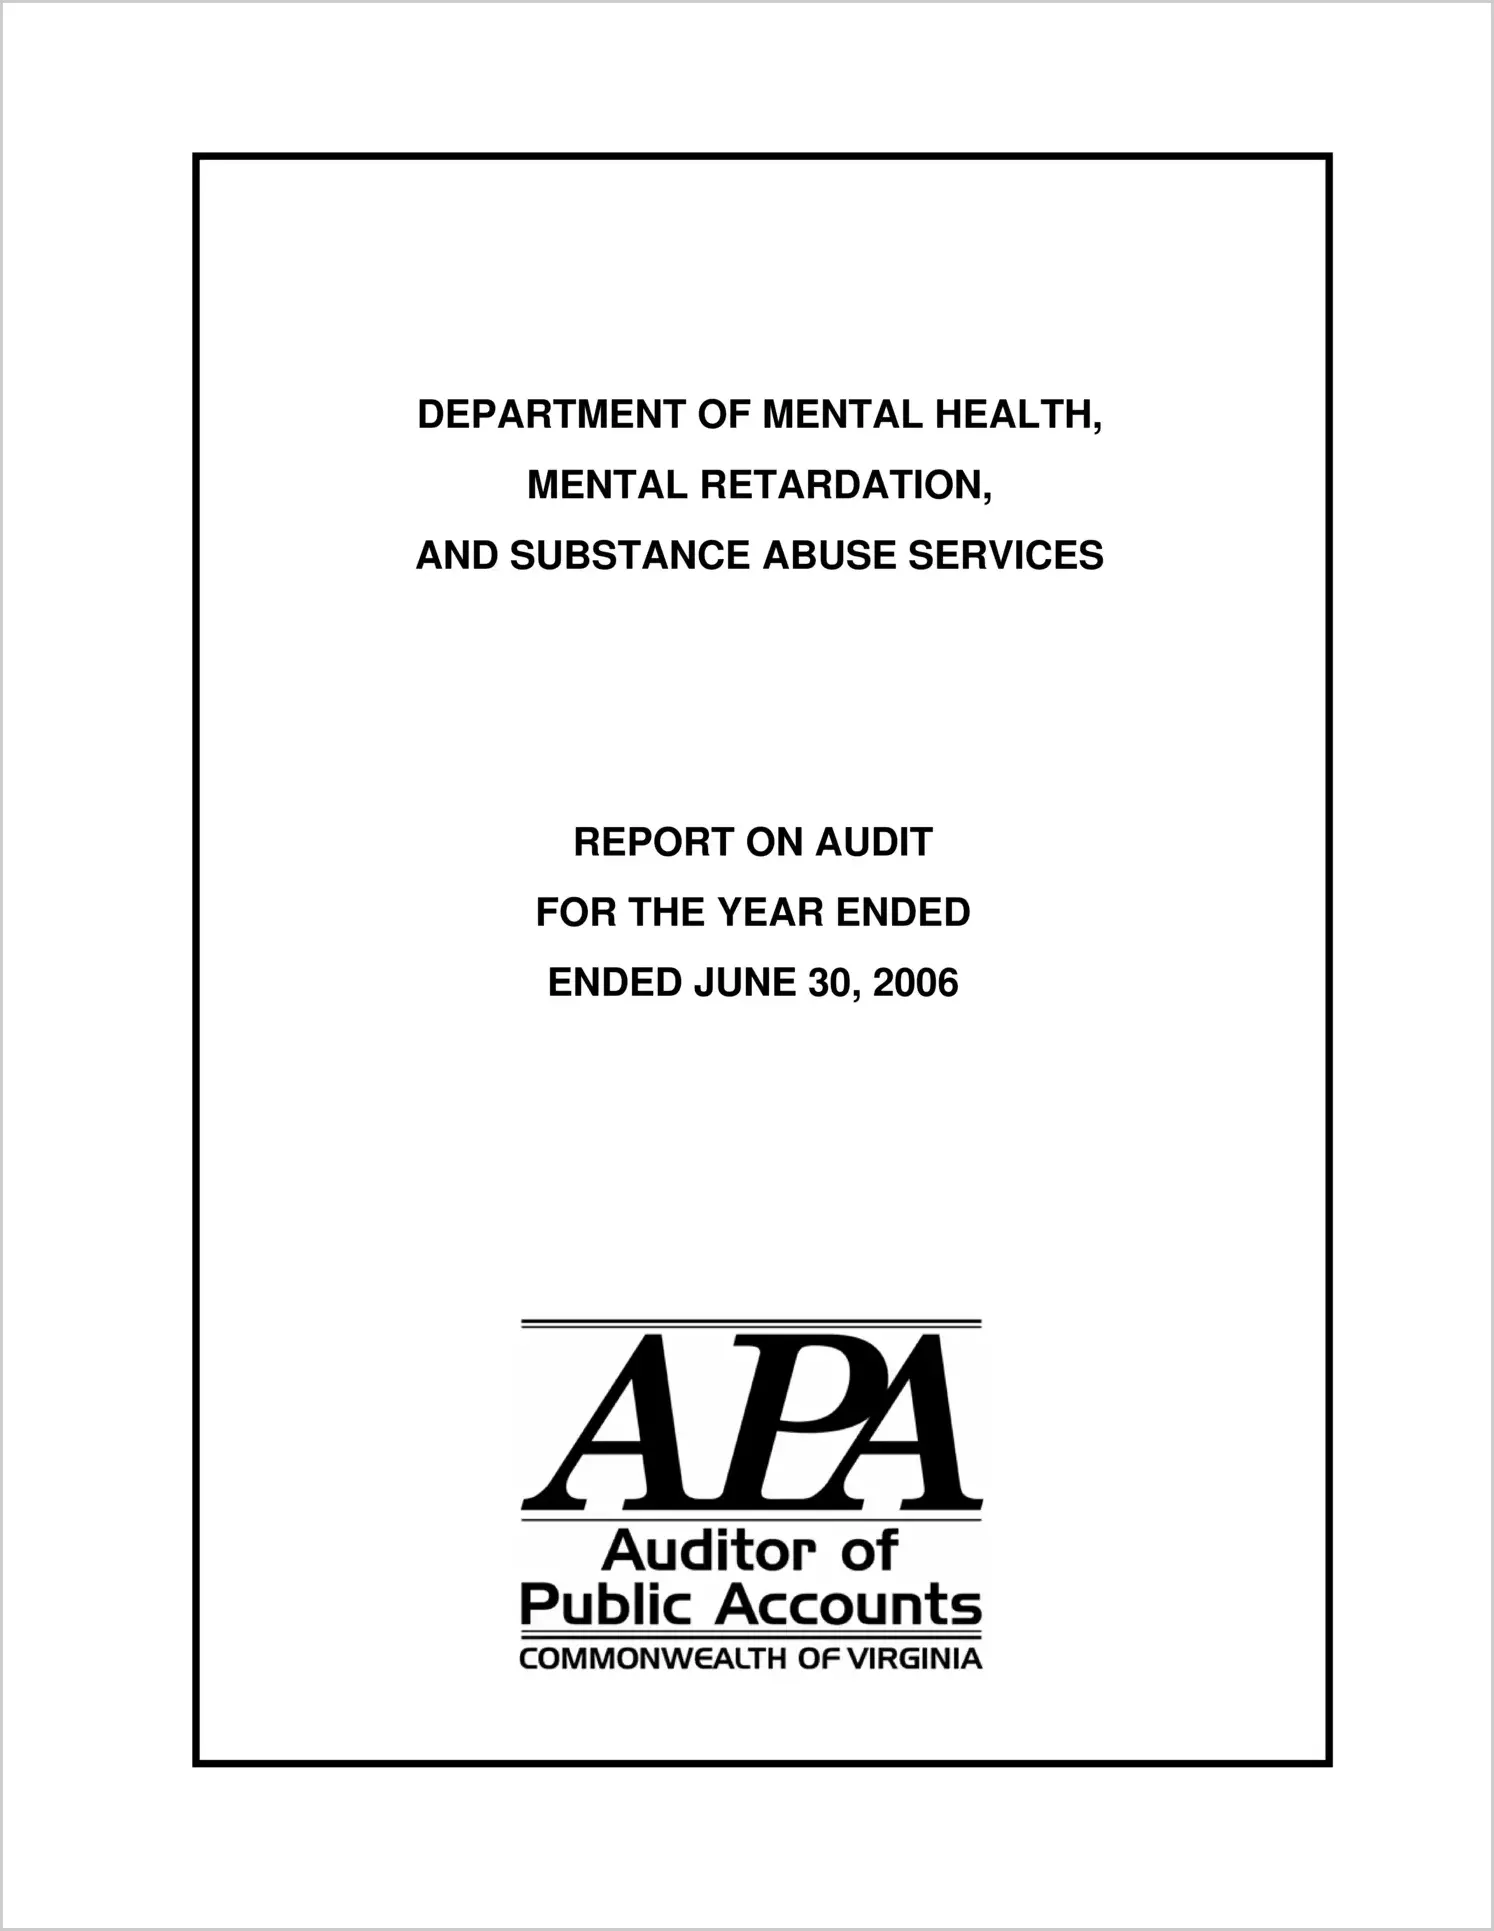 Department of Mental Health, Mental Retardation, and Substance Abuse Services for the year ended June 30, 2006